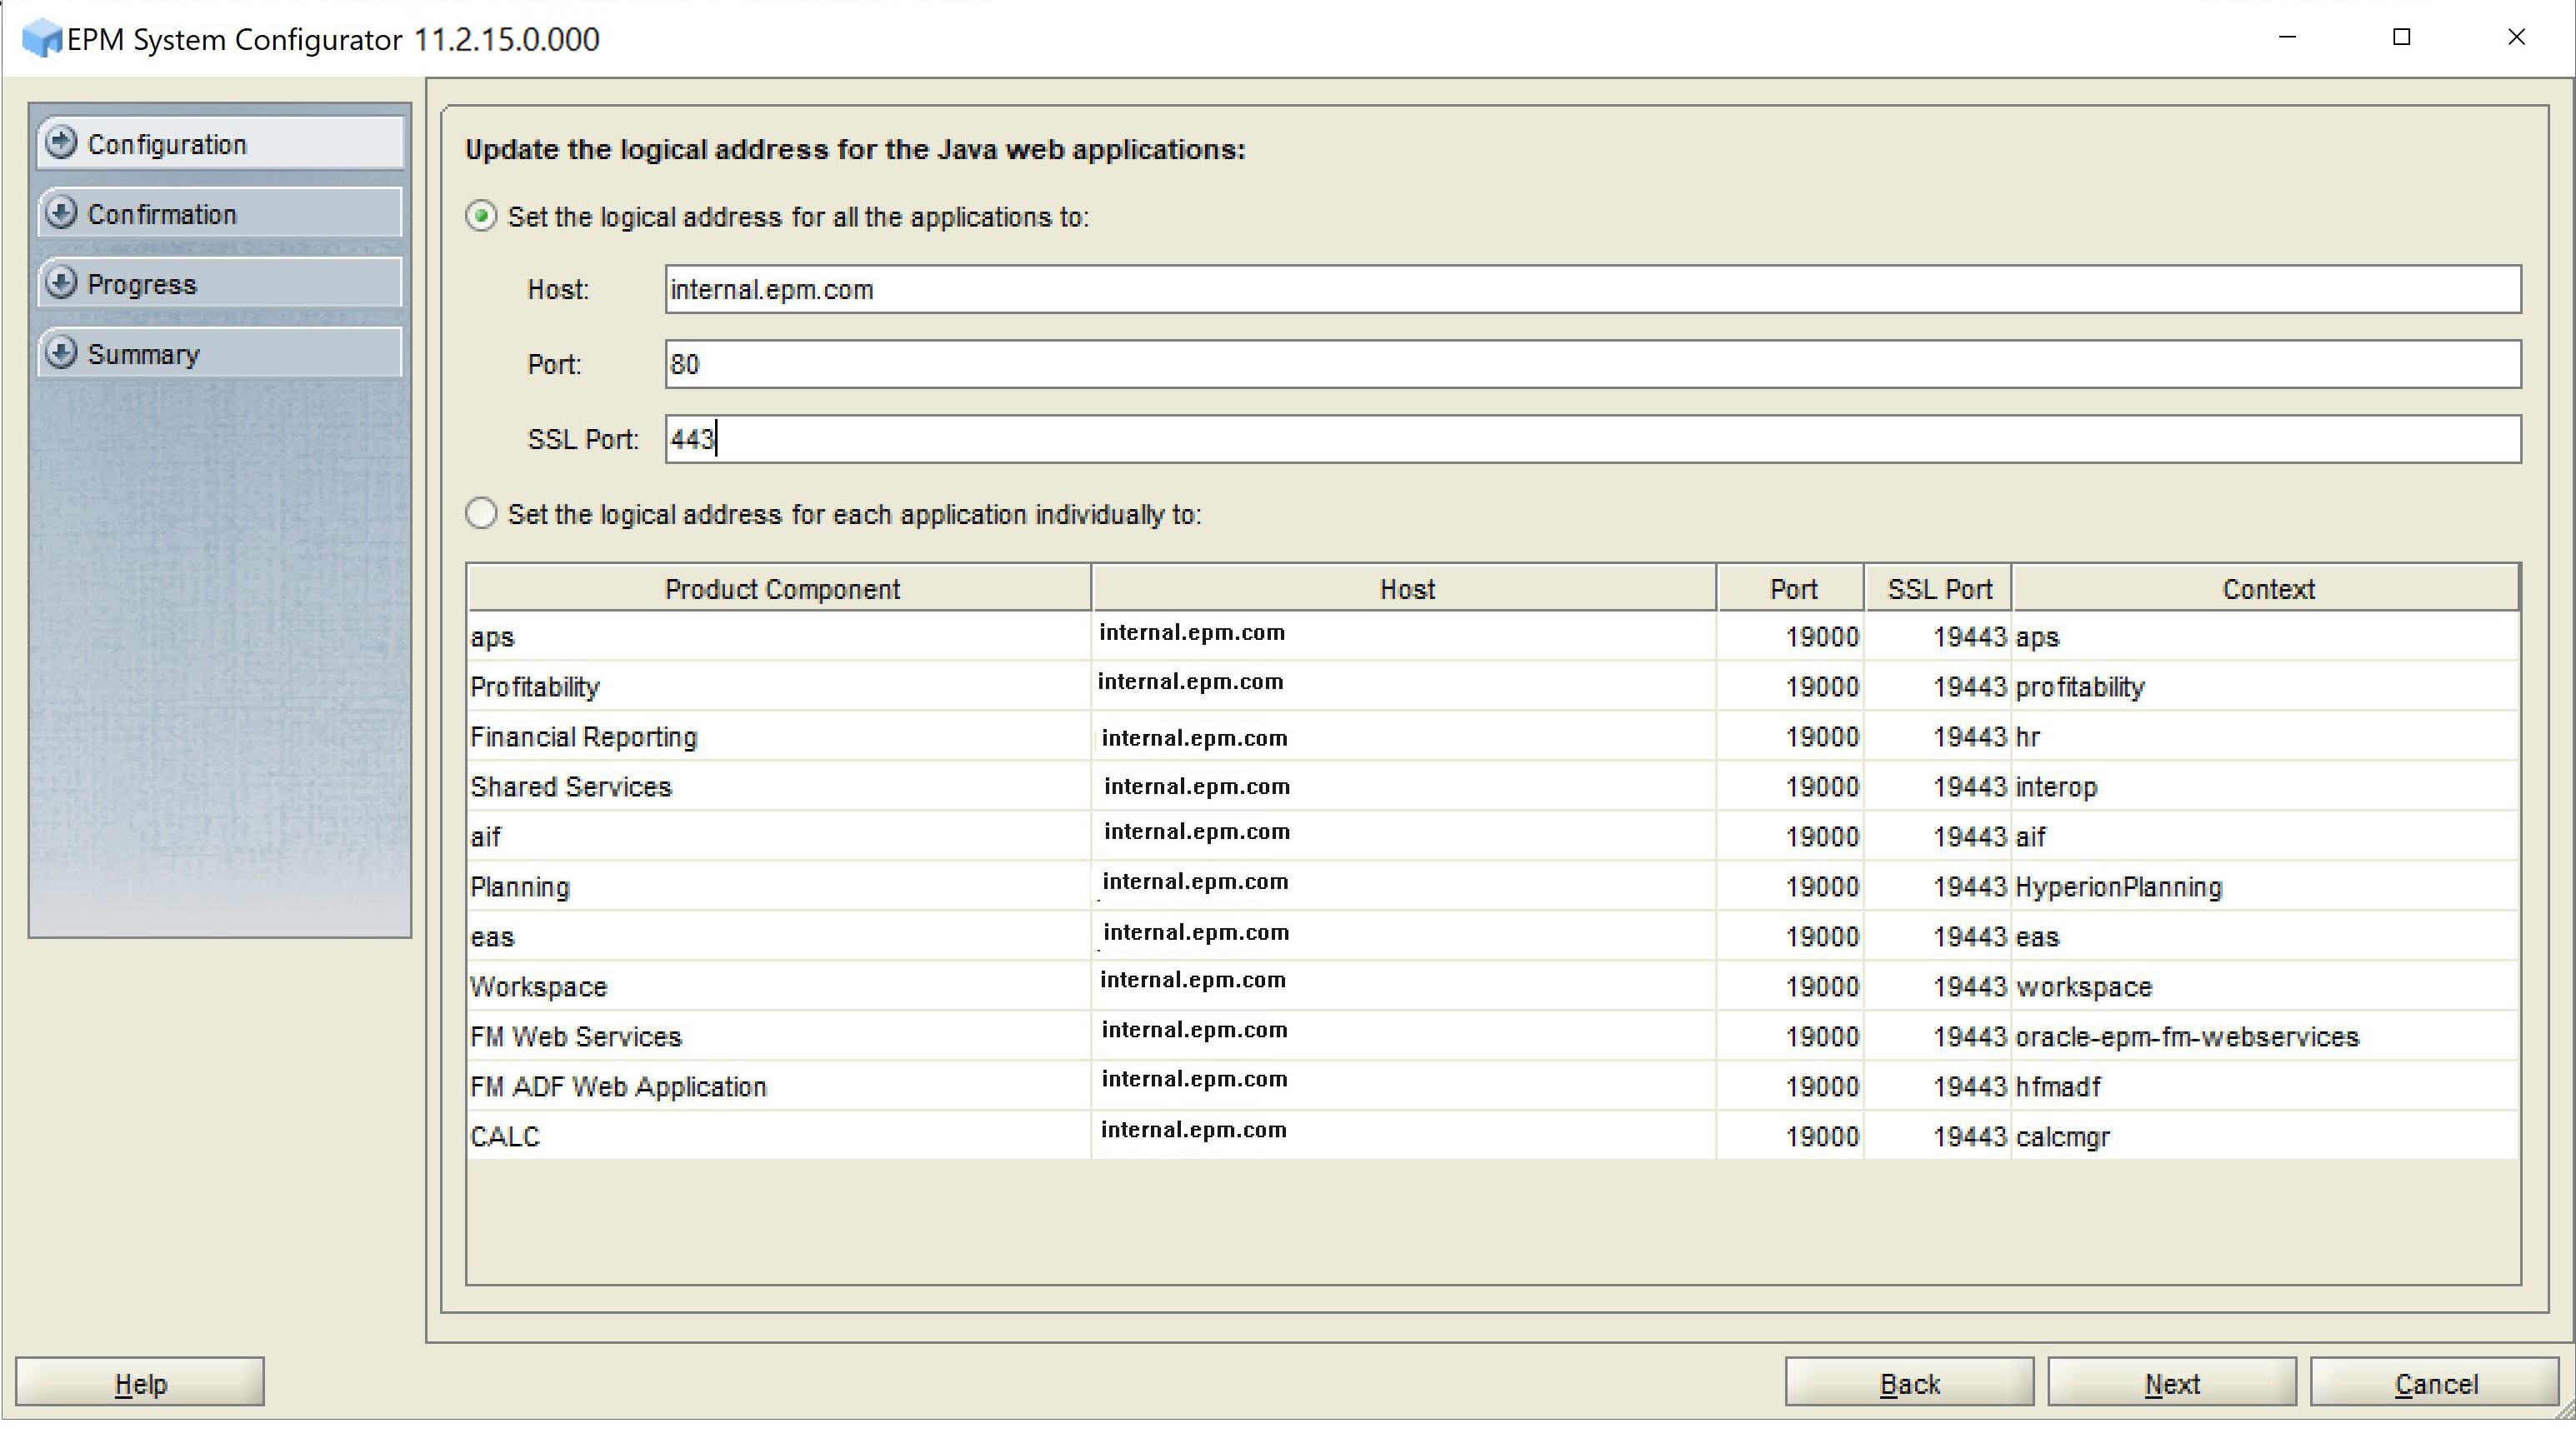 Update the logical web address for the Java web applications screen of EPM System Configurator